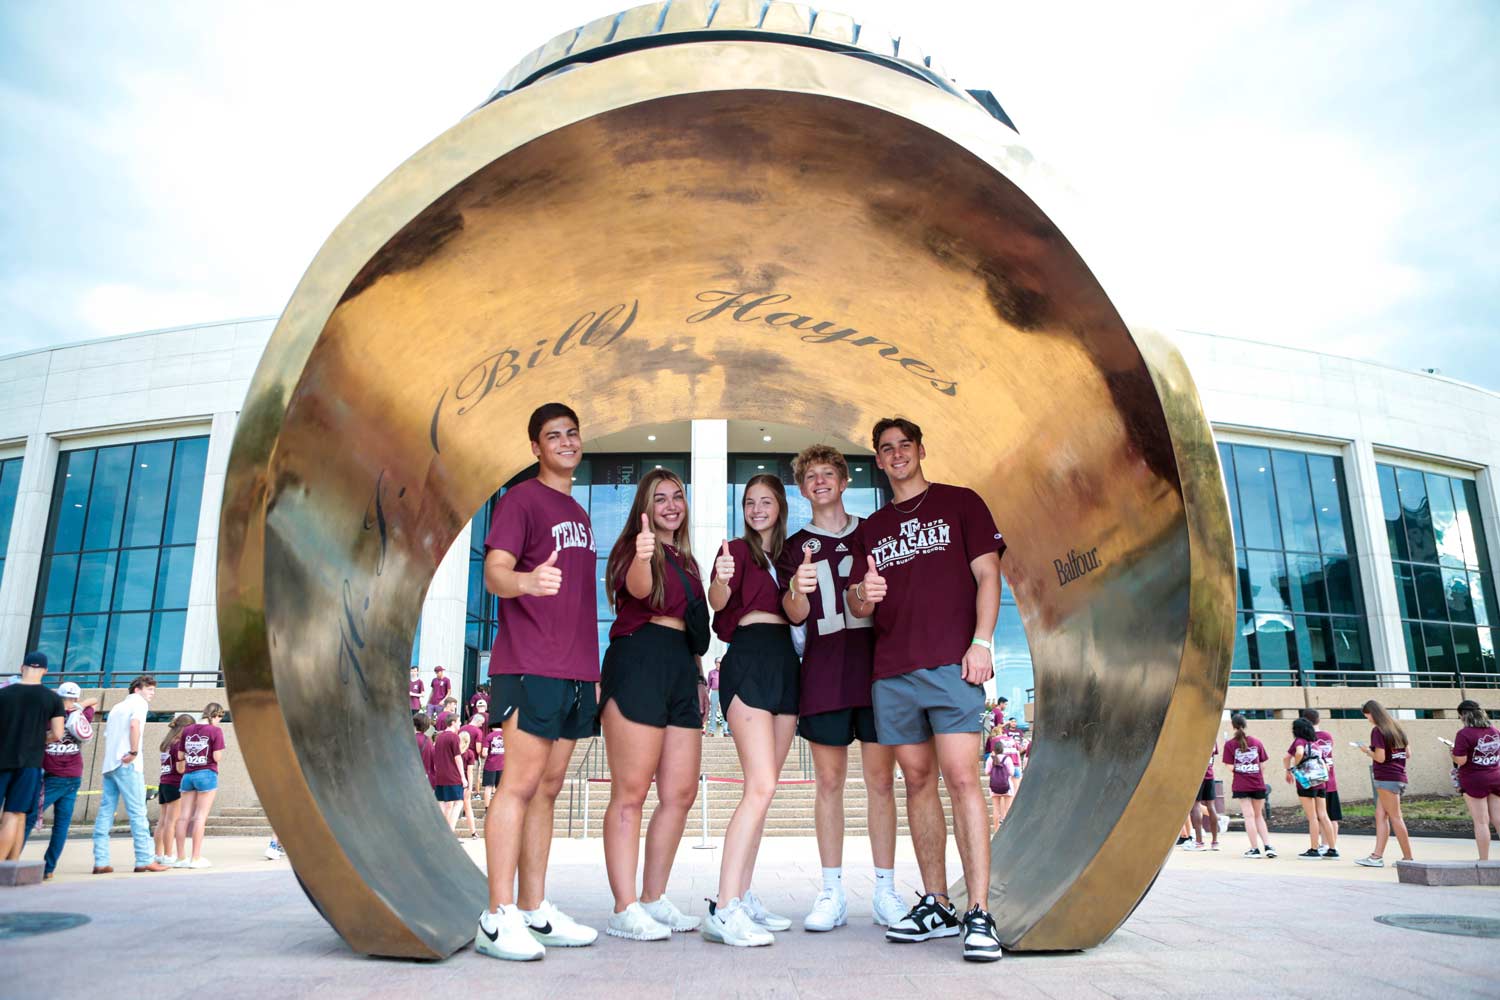 Texas A&M University students posing under the Association of Former Students Ring Statue